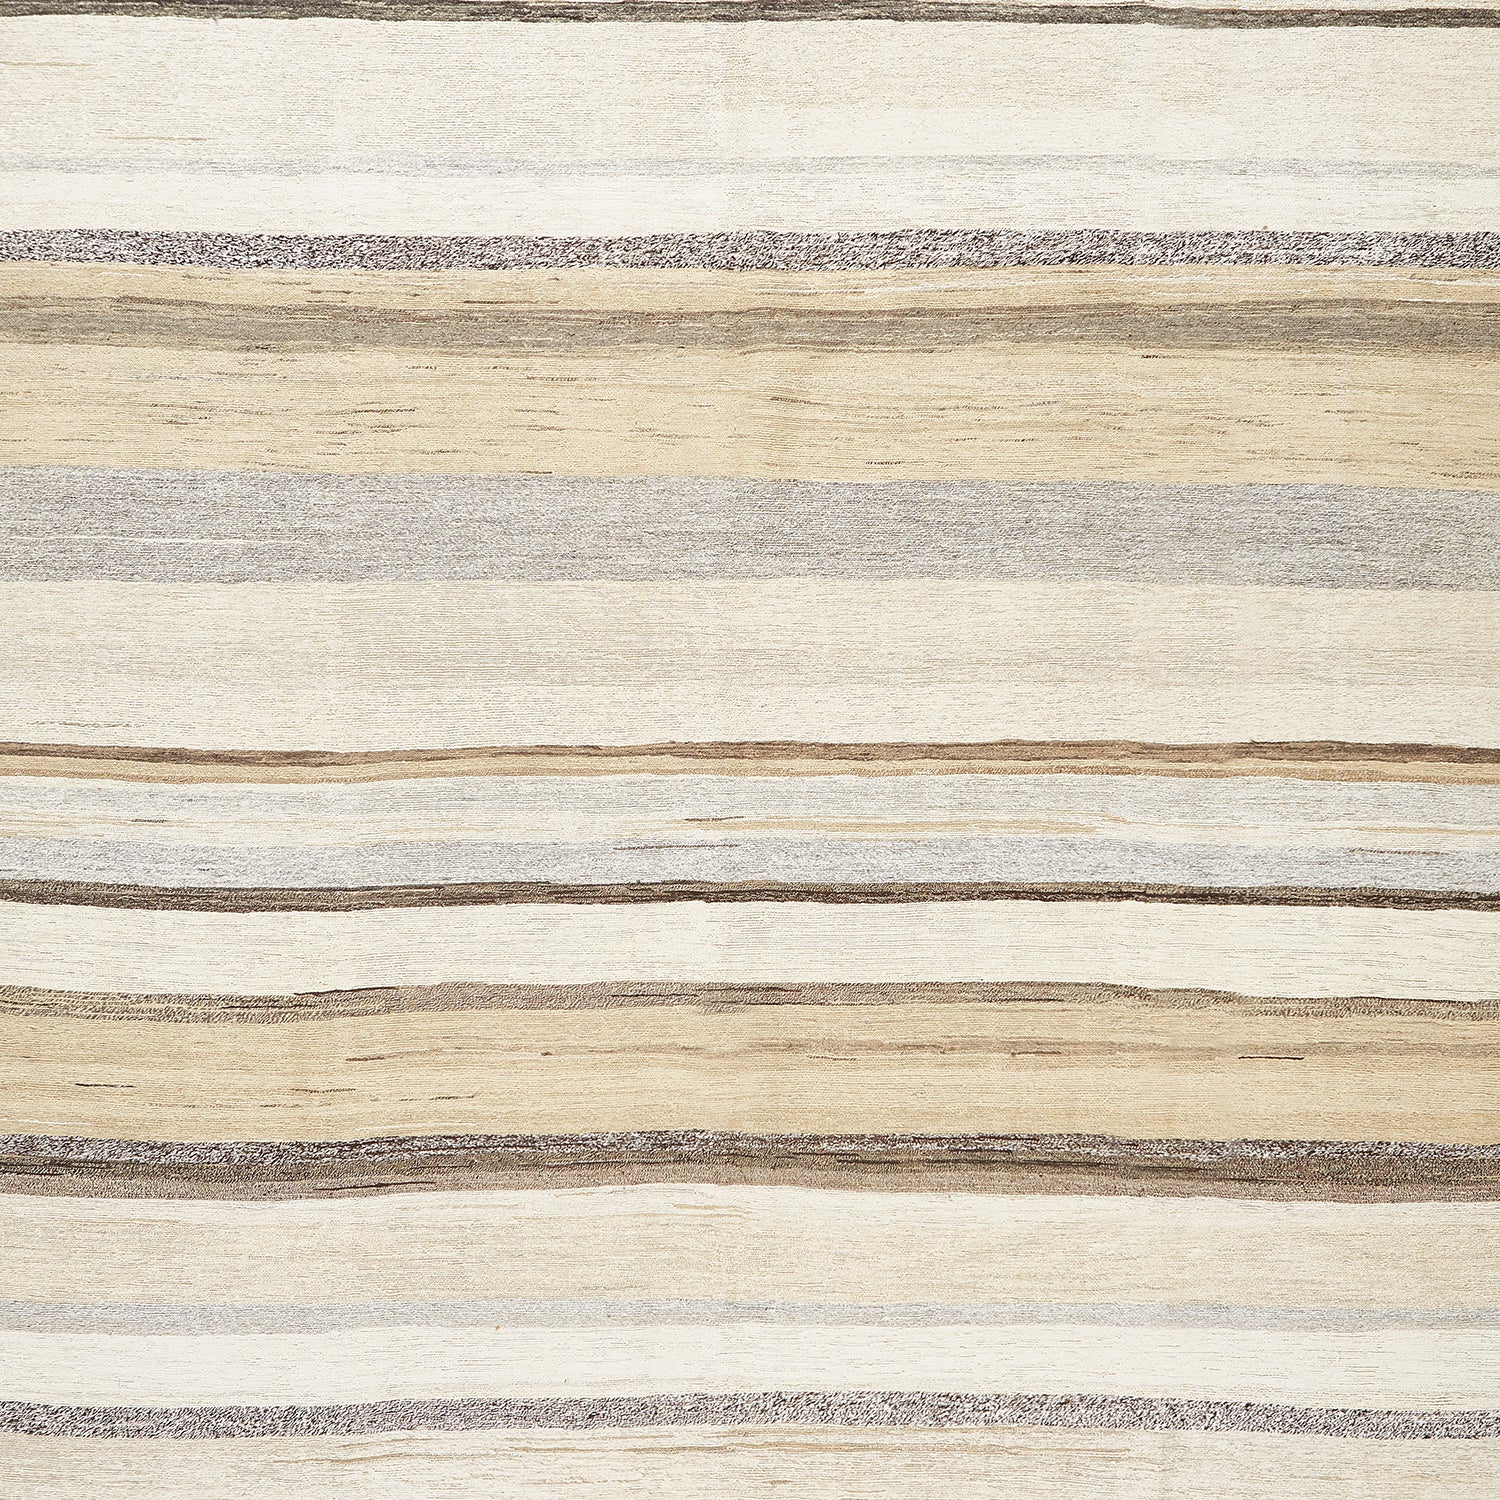 Close-up of textured surface with striped pattern resembling wood grain.